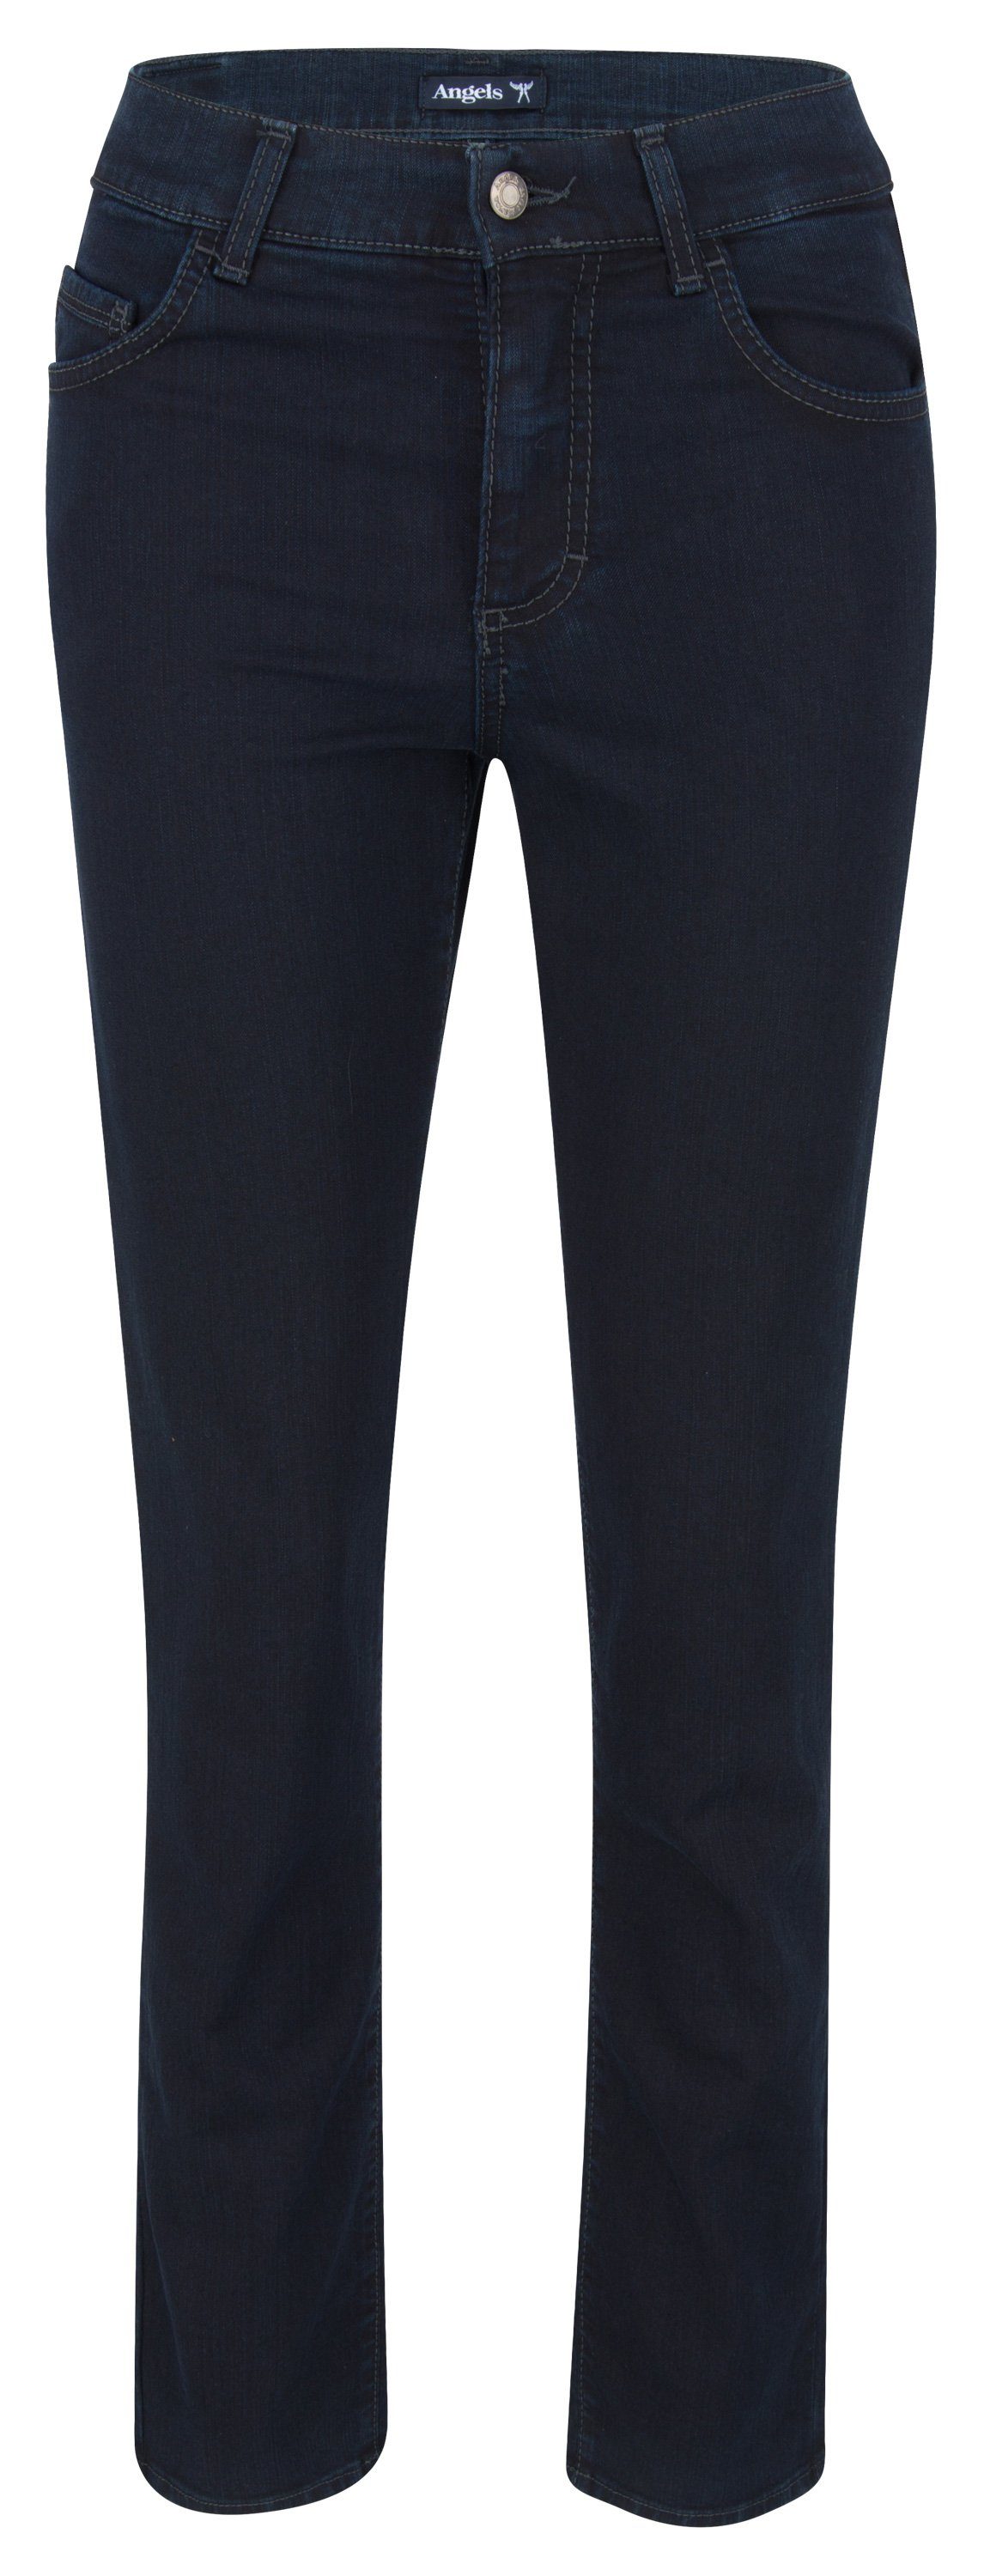 ANGELS Stretch-Jeans ANGELS JEANS DOLLY blue black 74 80.200